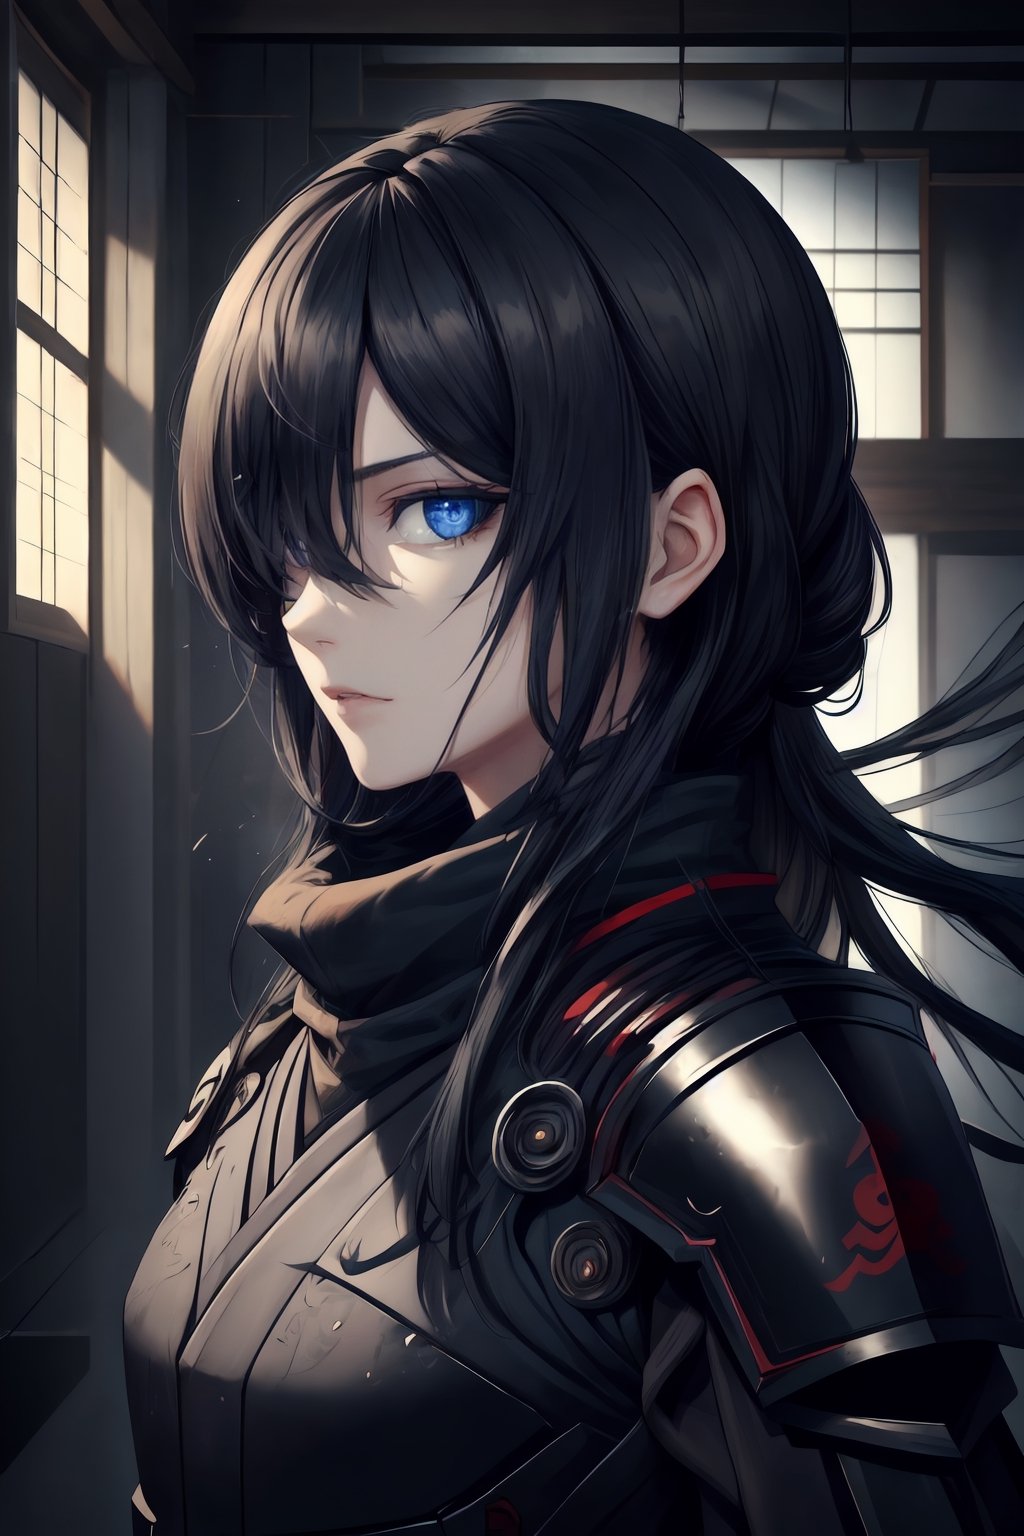 best quality, masterpiece, 1girl,older_female,highres, best quality, masterpiece, 1girl,highres,older_female,solo, blue_eyes,detailed blue eyes,scary gaze,sidelocks, closed_mouth, upper_body,hollow eyes, long black hair,hair_over_eye,hair over one eye,Shinobi,japanese armor,viewed_from_side,looking_at_viewer,looking to the side,izanamidef